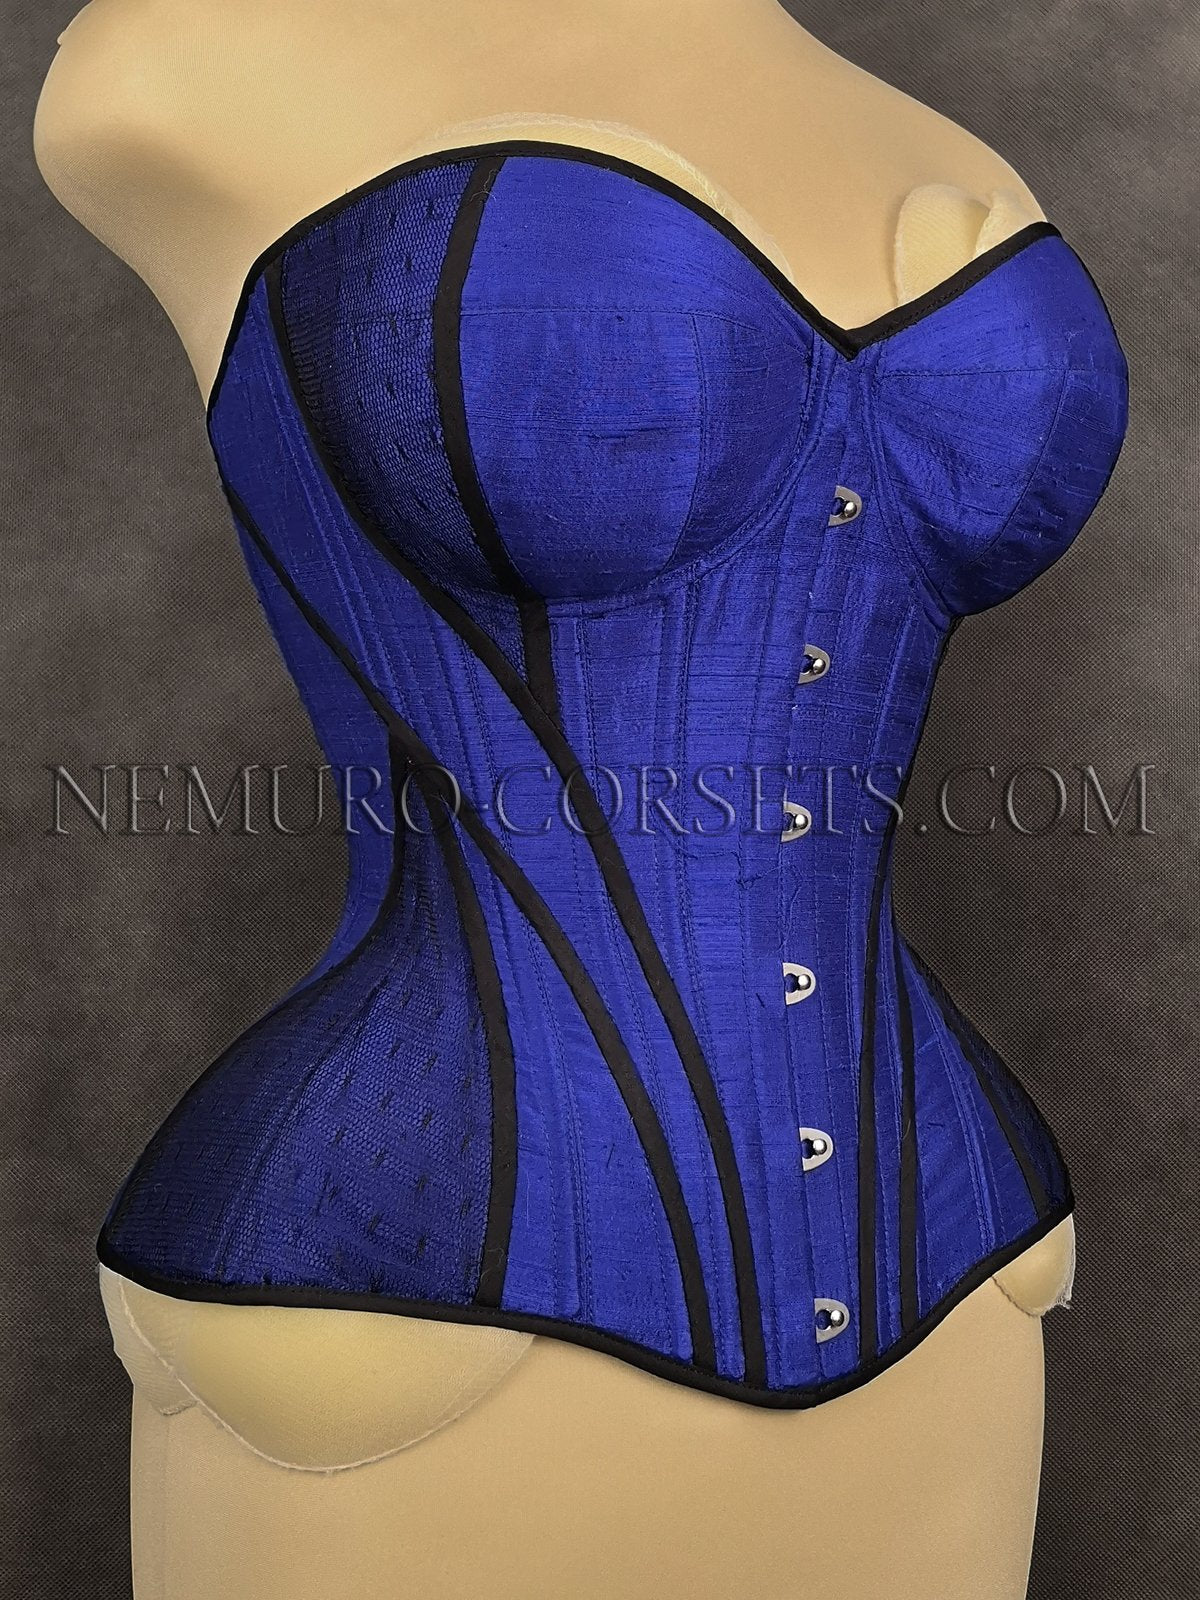 my bust keeps spilling out the sides of my corset - why? The